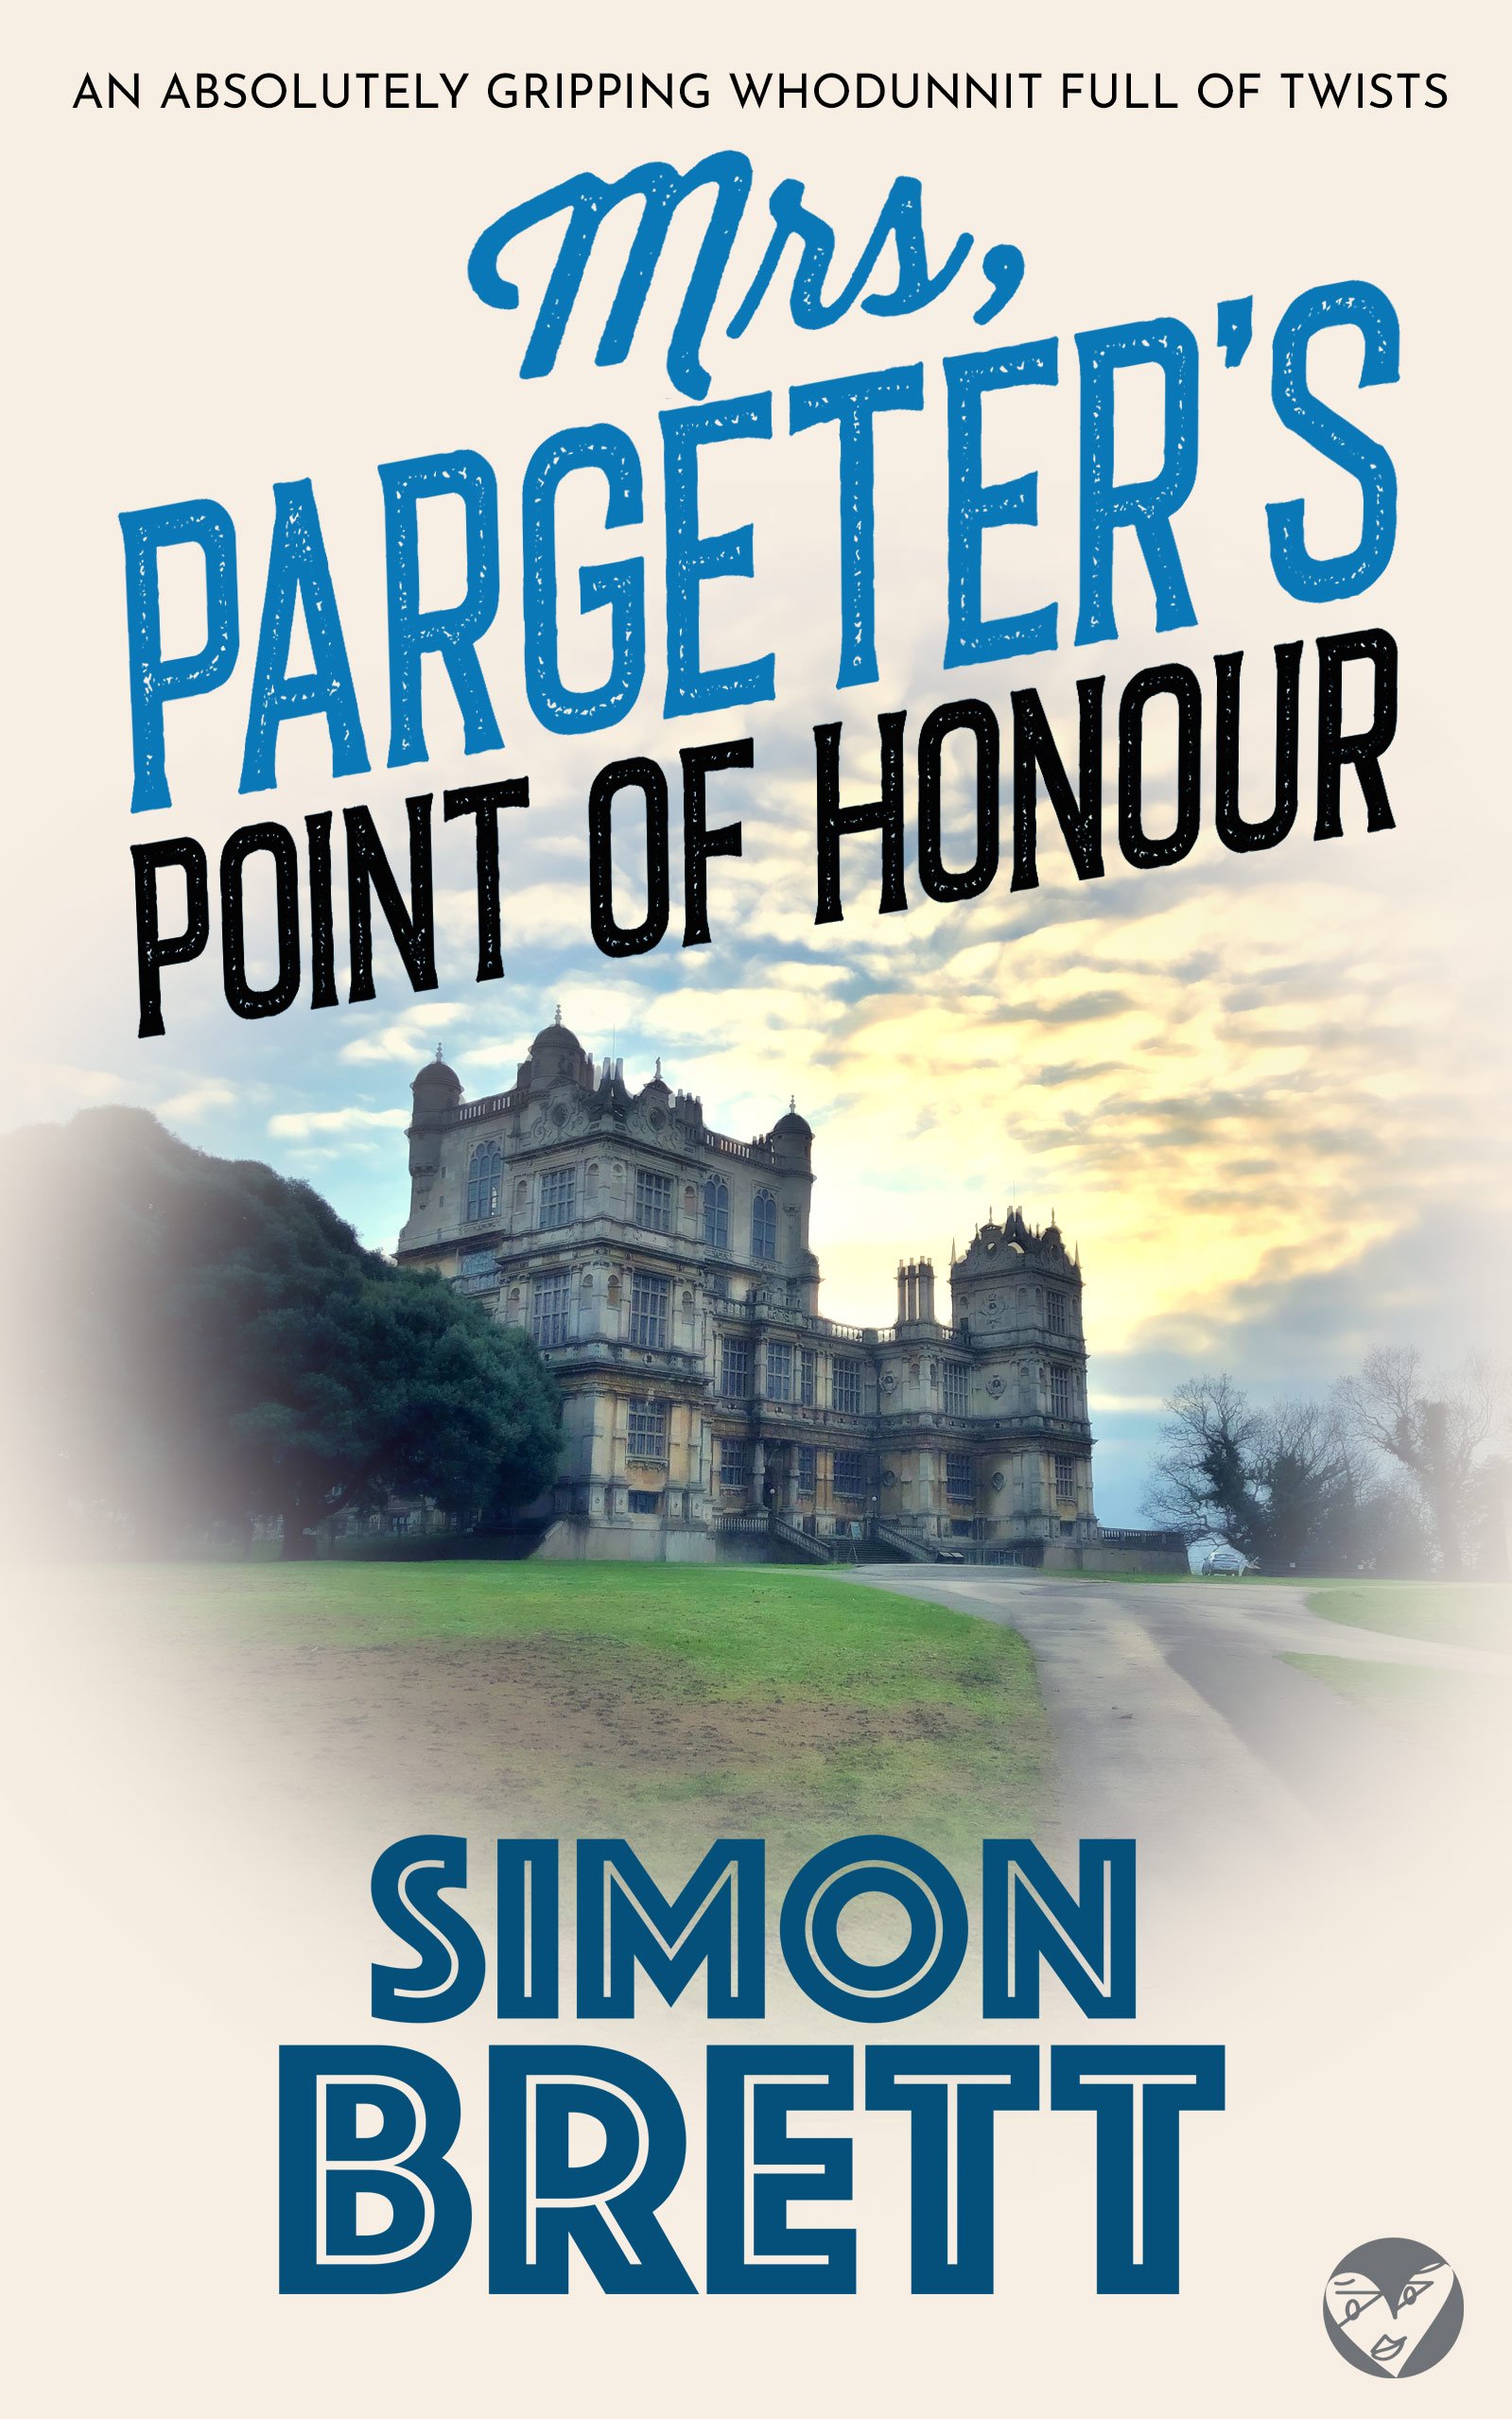 MRS PARGETER'S POINT OF HONOUR 560K Cover publish.jpg